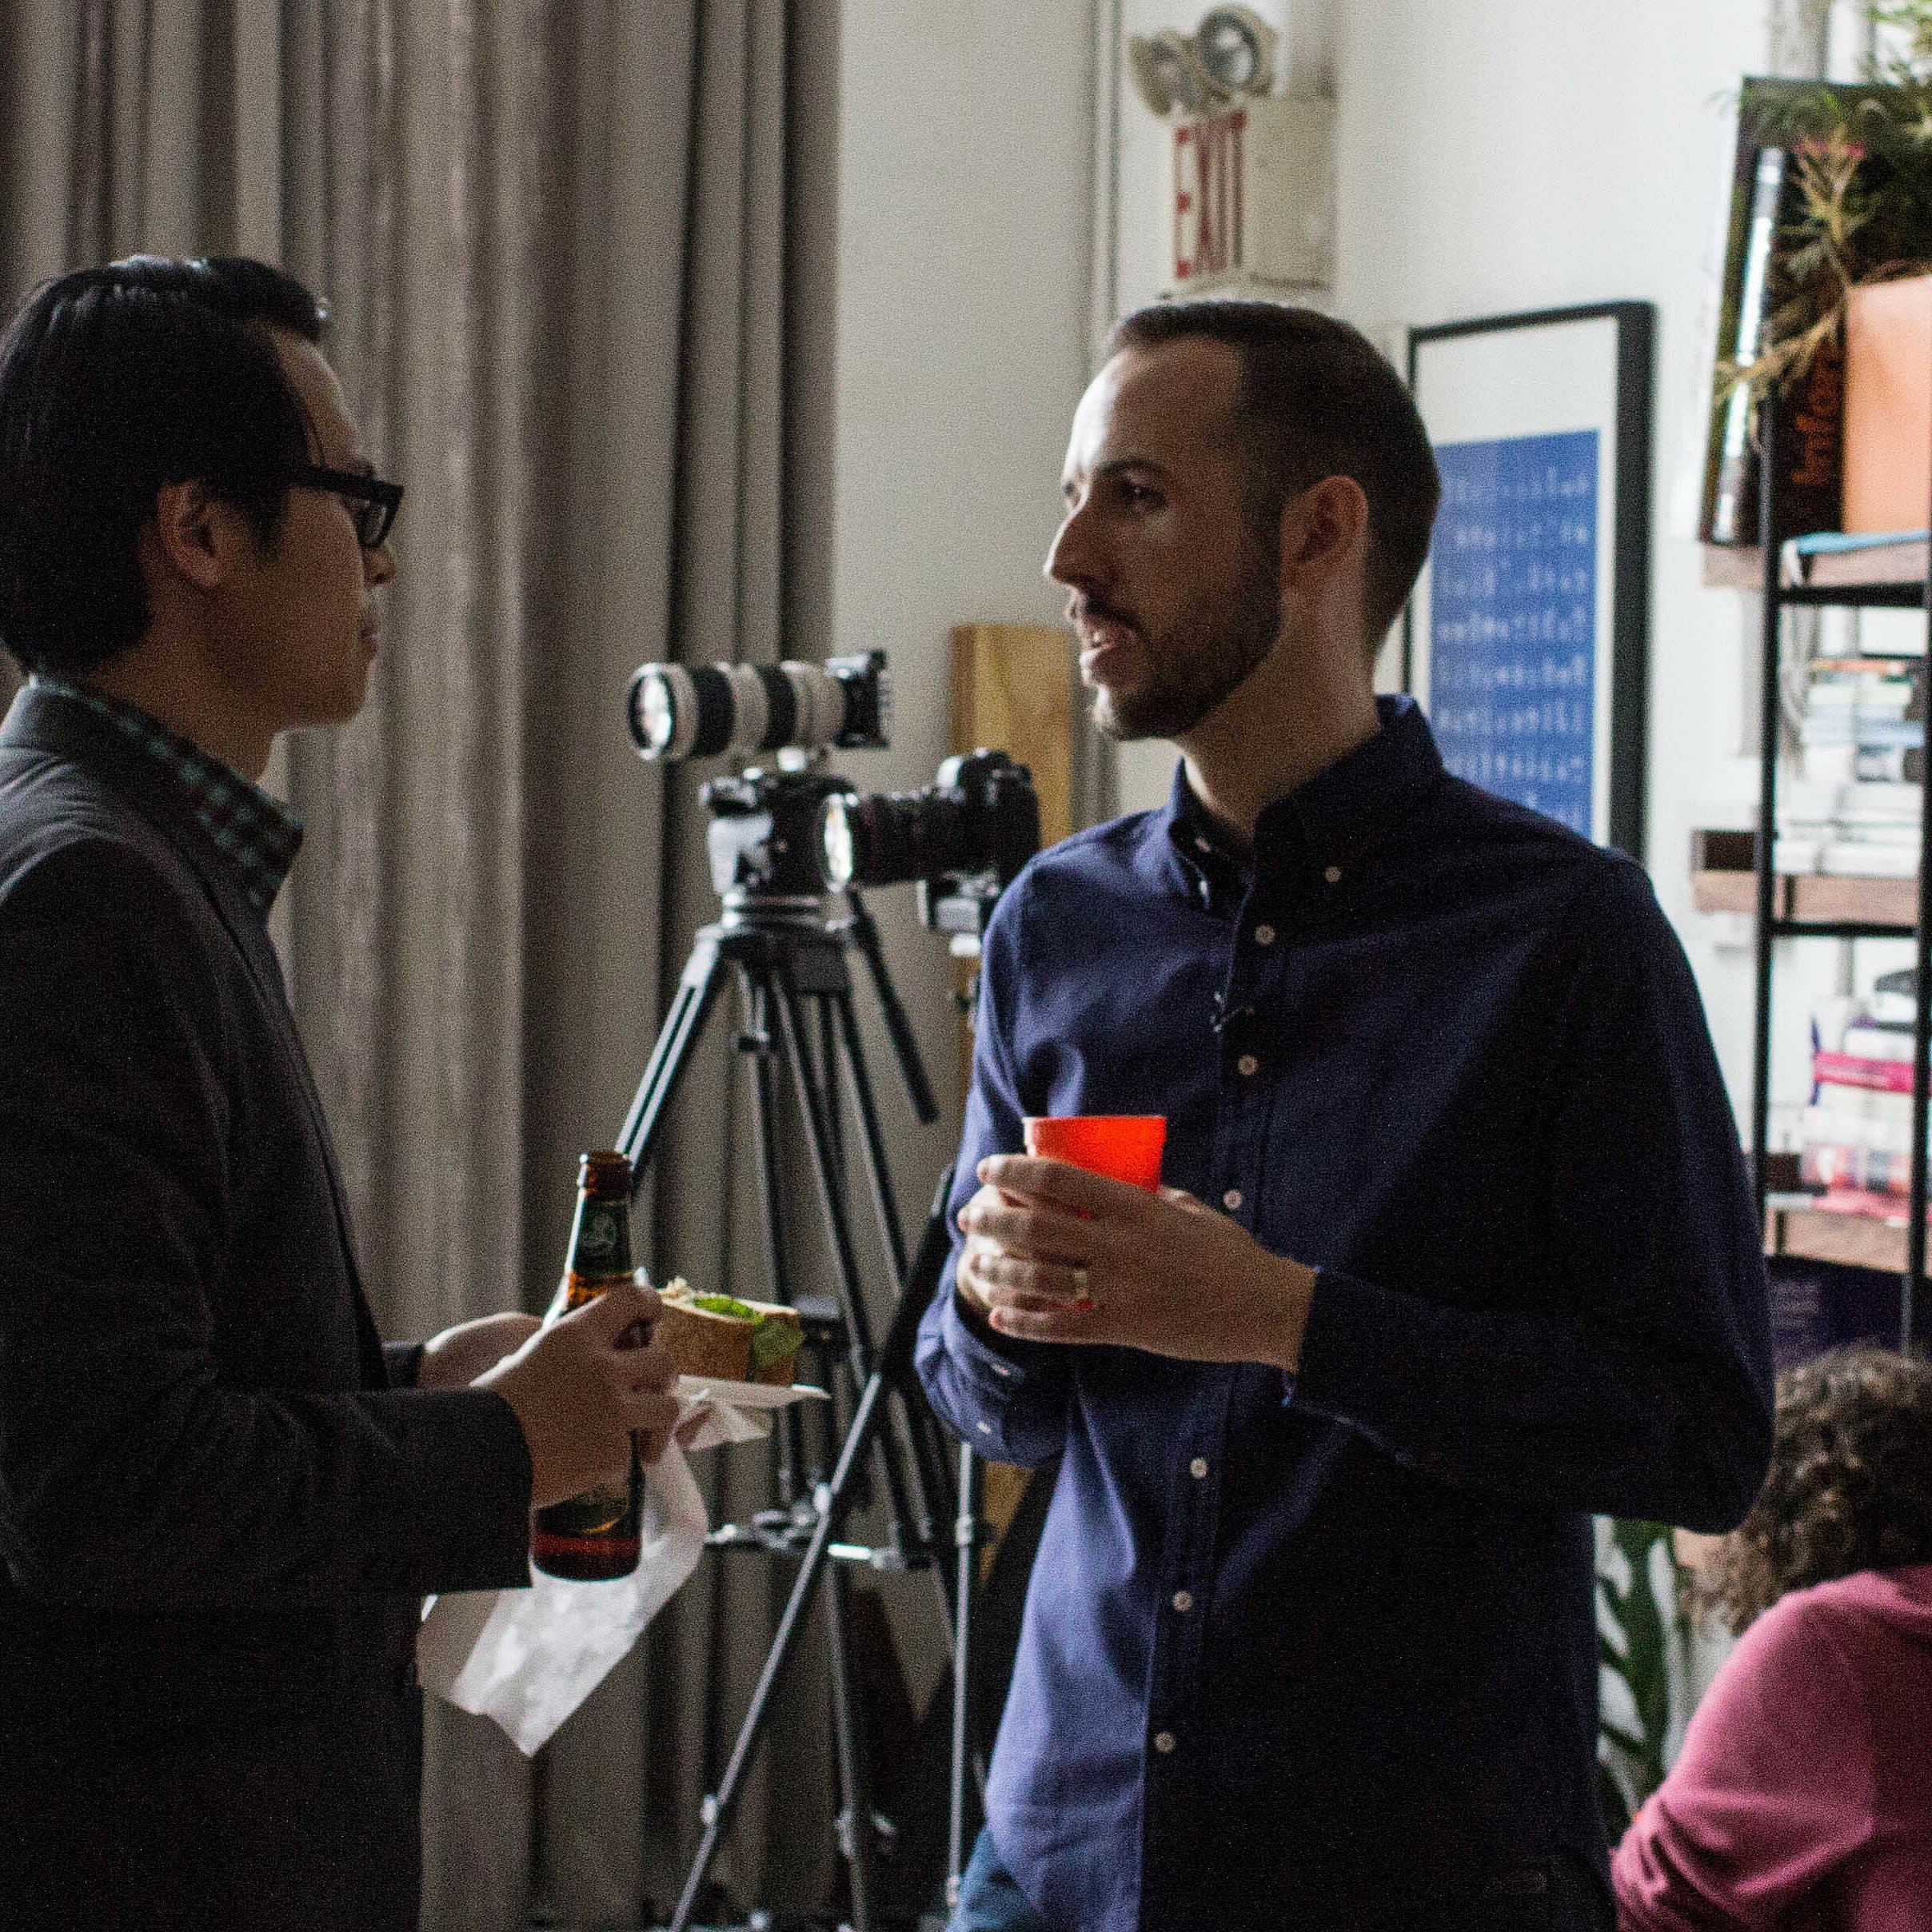 Two people in conversation indoors. One, holding a drink and snacks, wears glasses and a casual blazer. The other, holding a red cup, has a beard and is dressed in a dark shirt. A camera on a tripod and bookshelves in the background suggest a creative or informal setting.